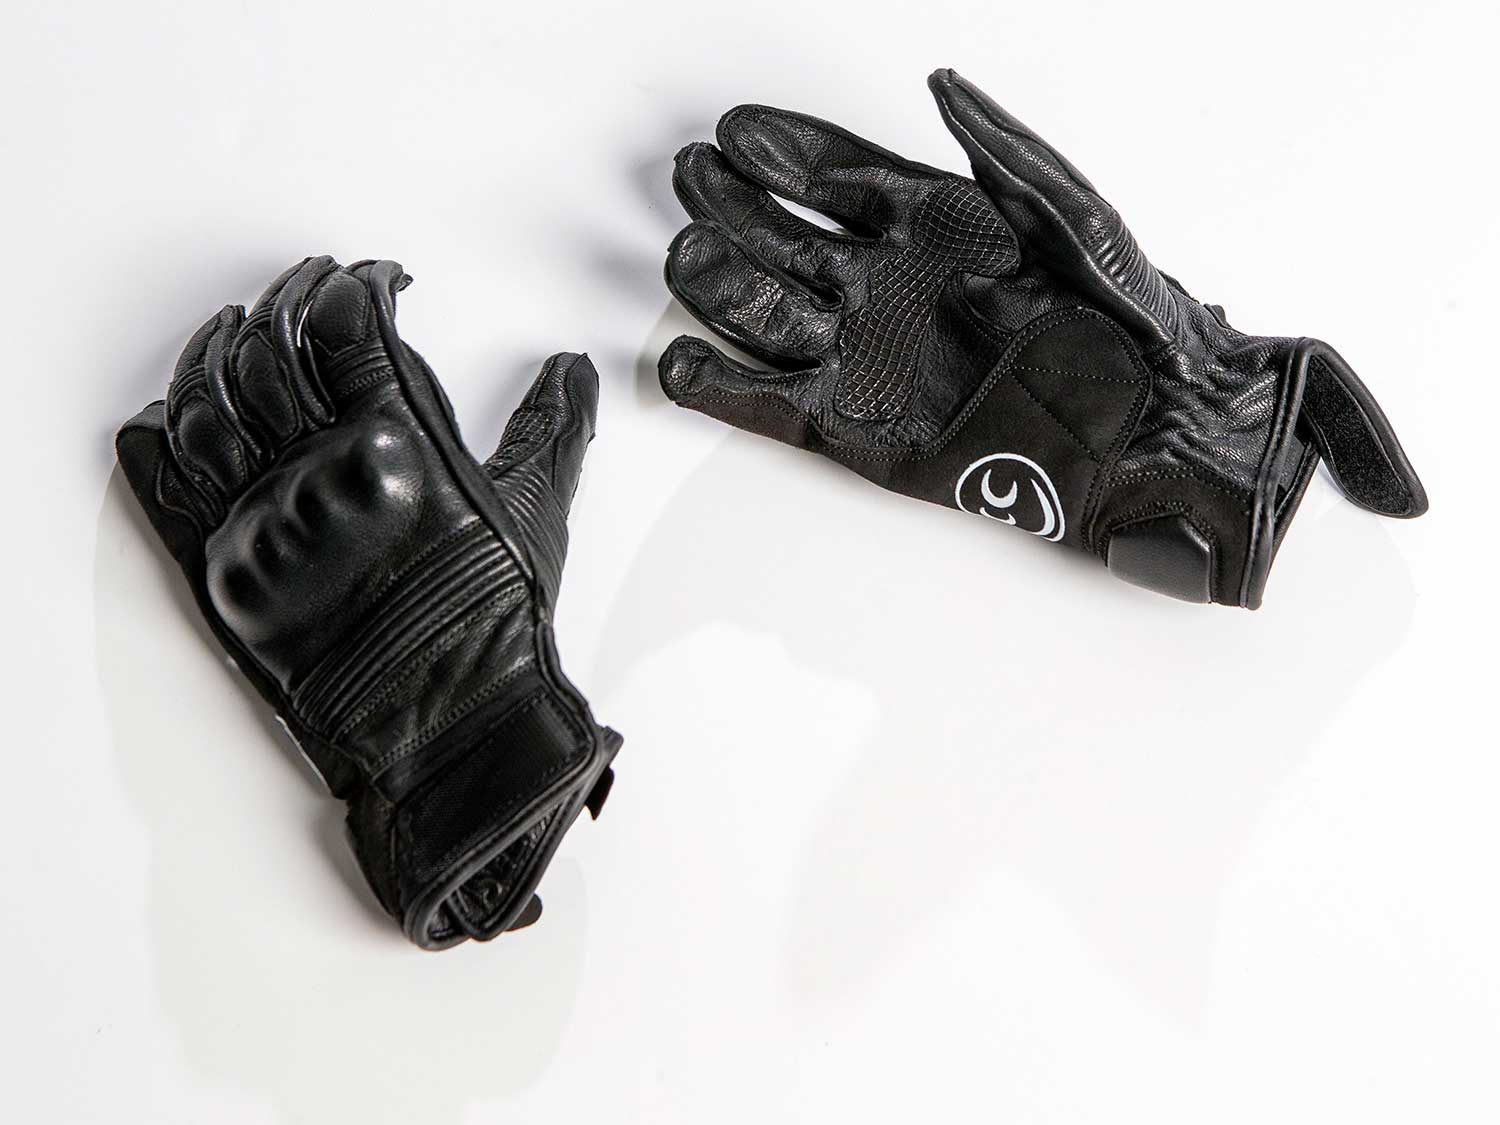 Military Light Duty Black Leather Driving Motorcycle Gloves Details about   New Large 